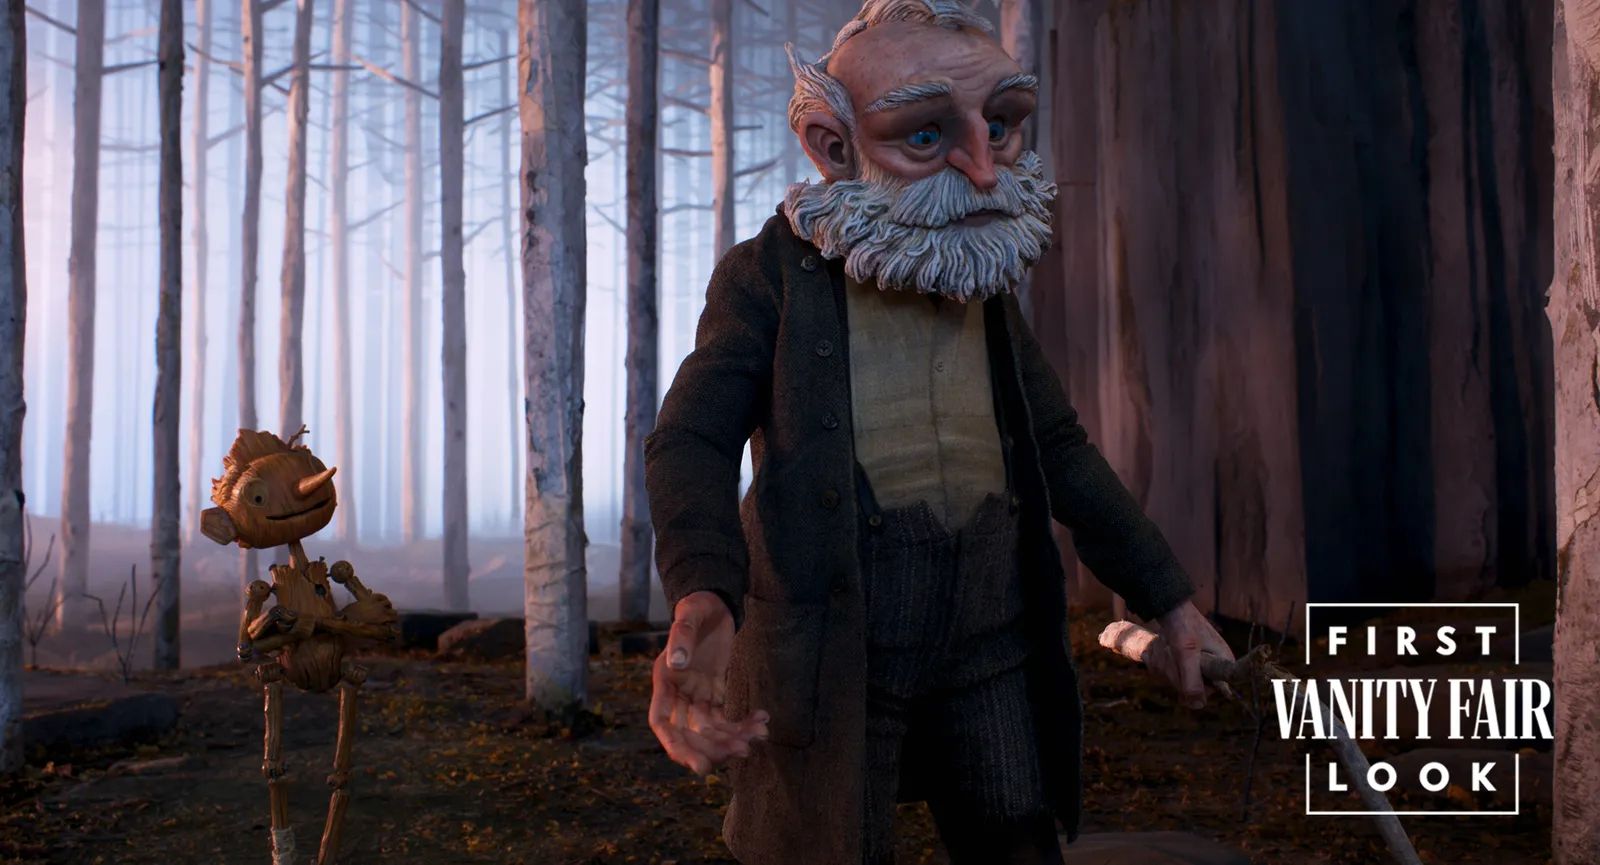 Guillermo Del Toro Pinocchio Vanity Fair First Look Geppetto Woods